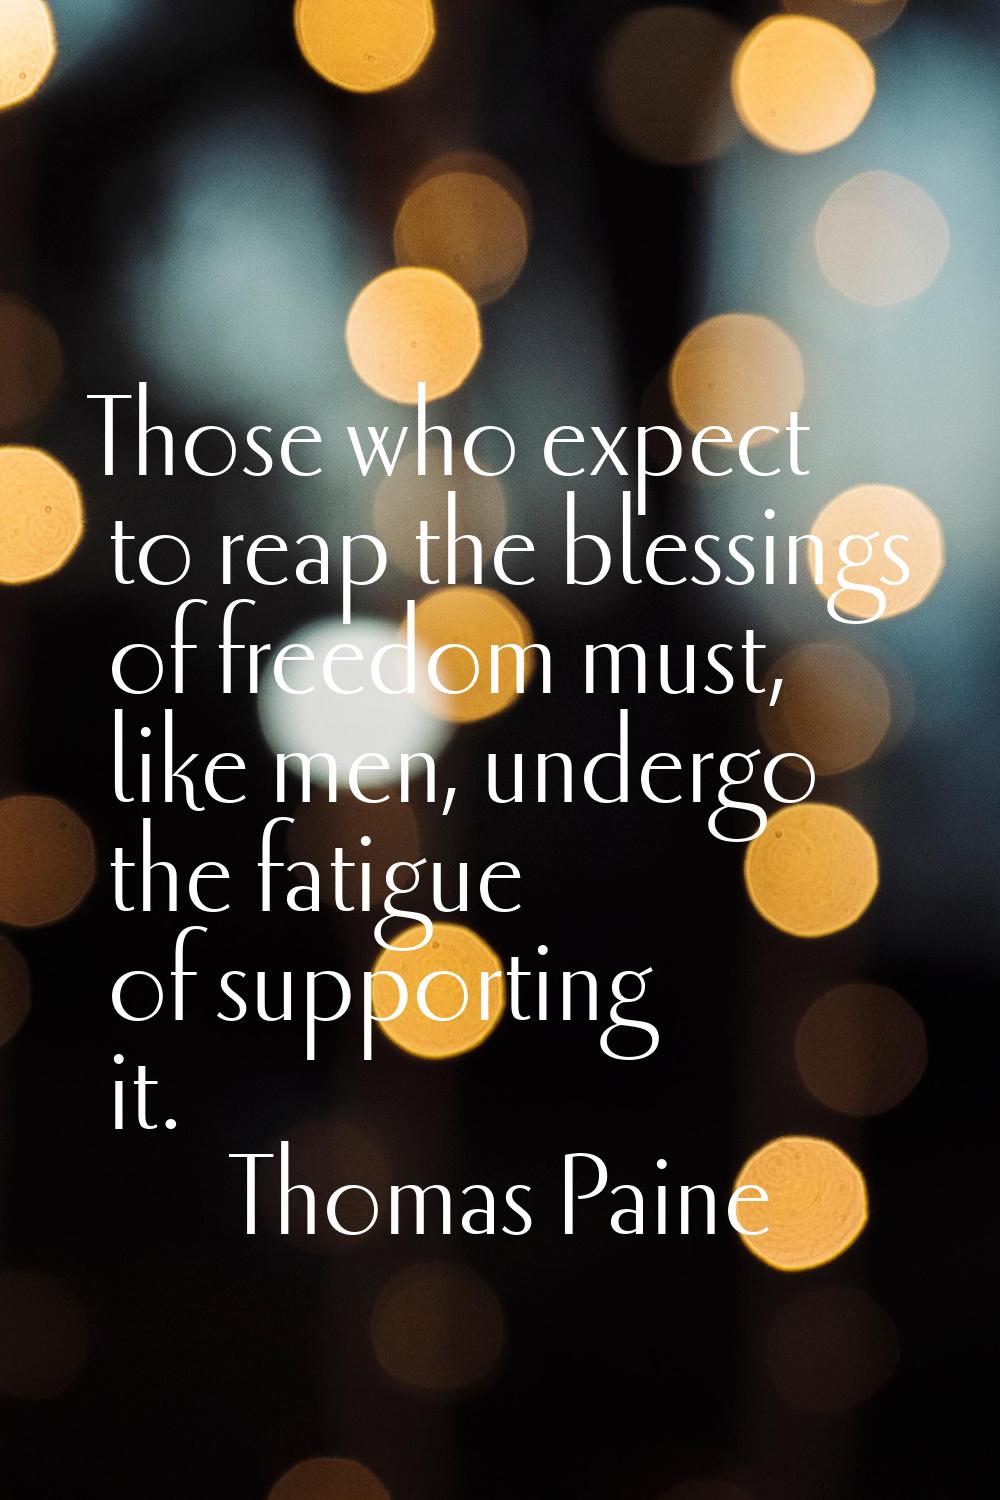 Those who expect to reap the blessings of freedom must, like men, undergo the fatigue of supporting